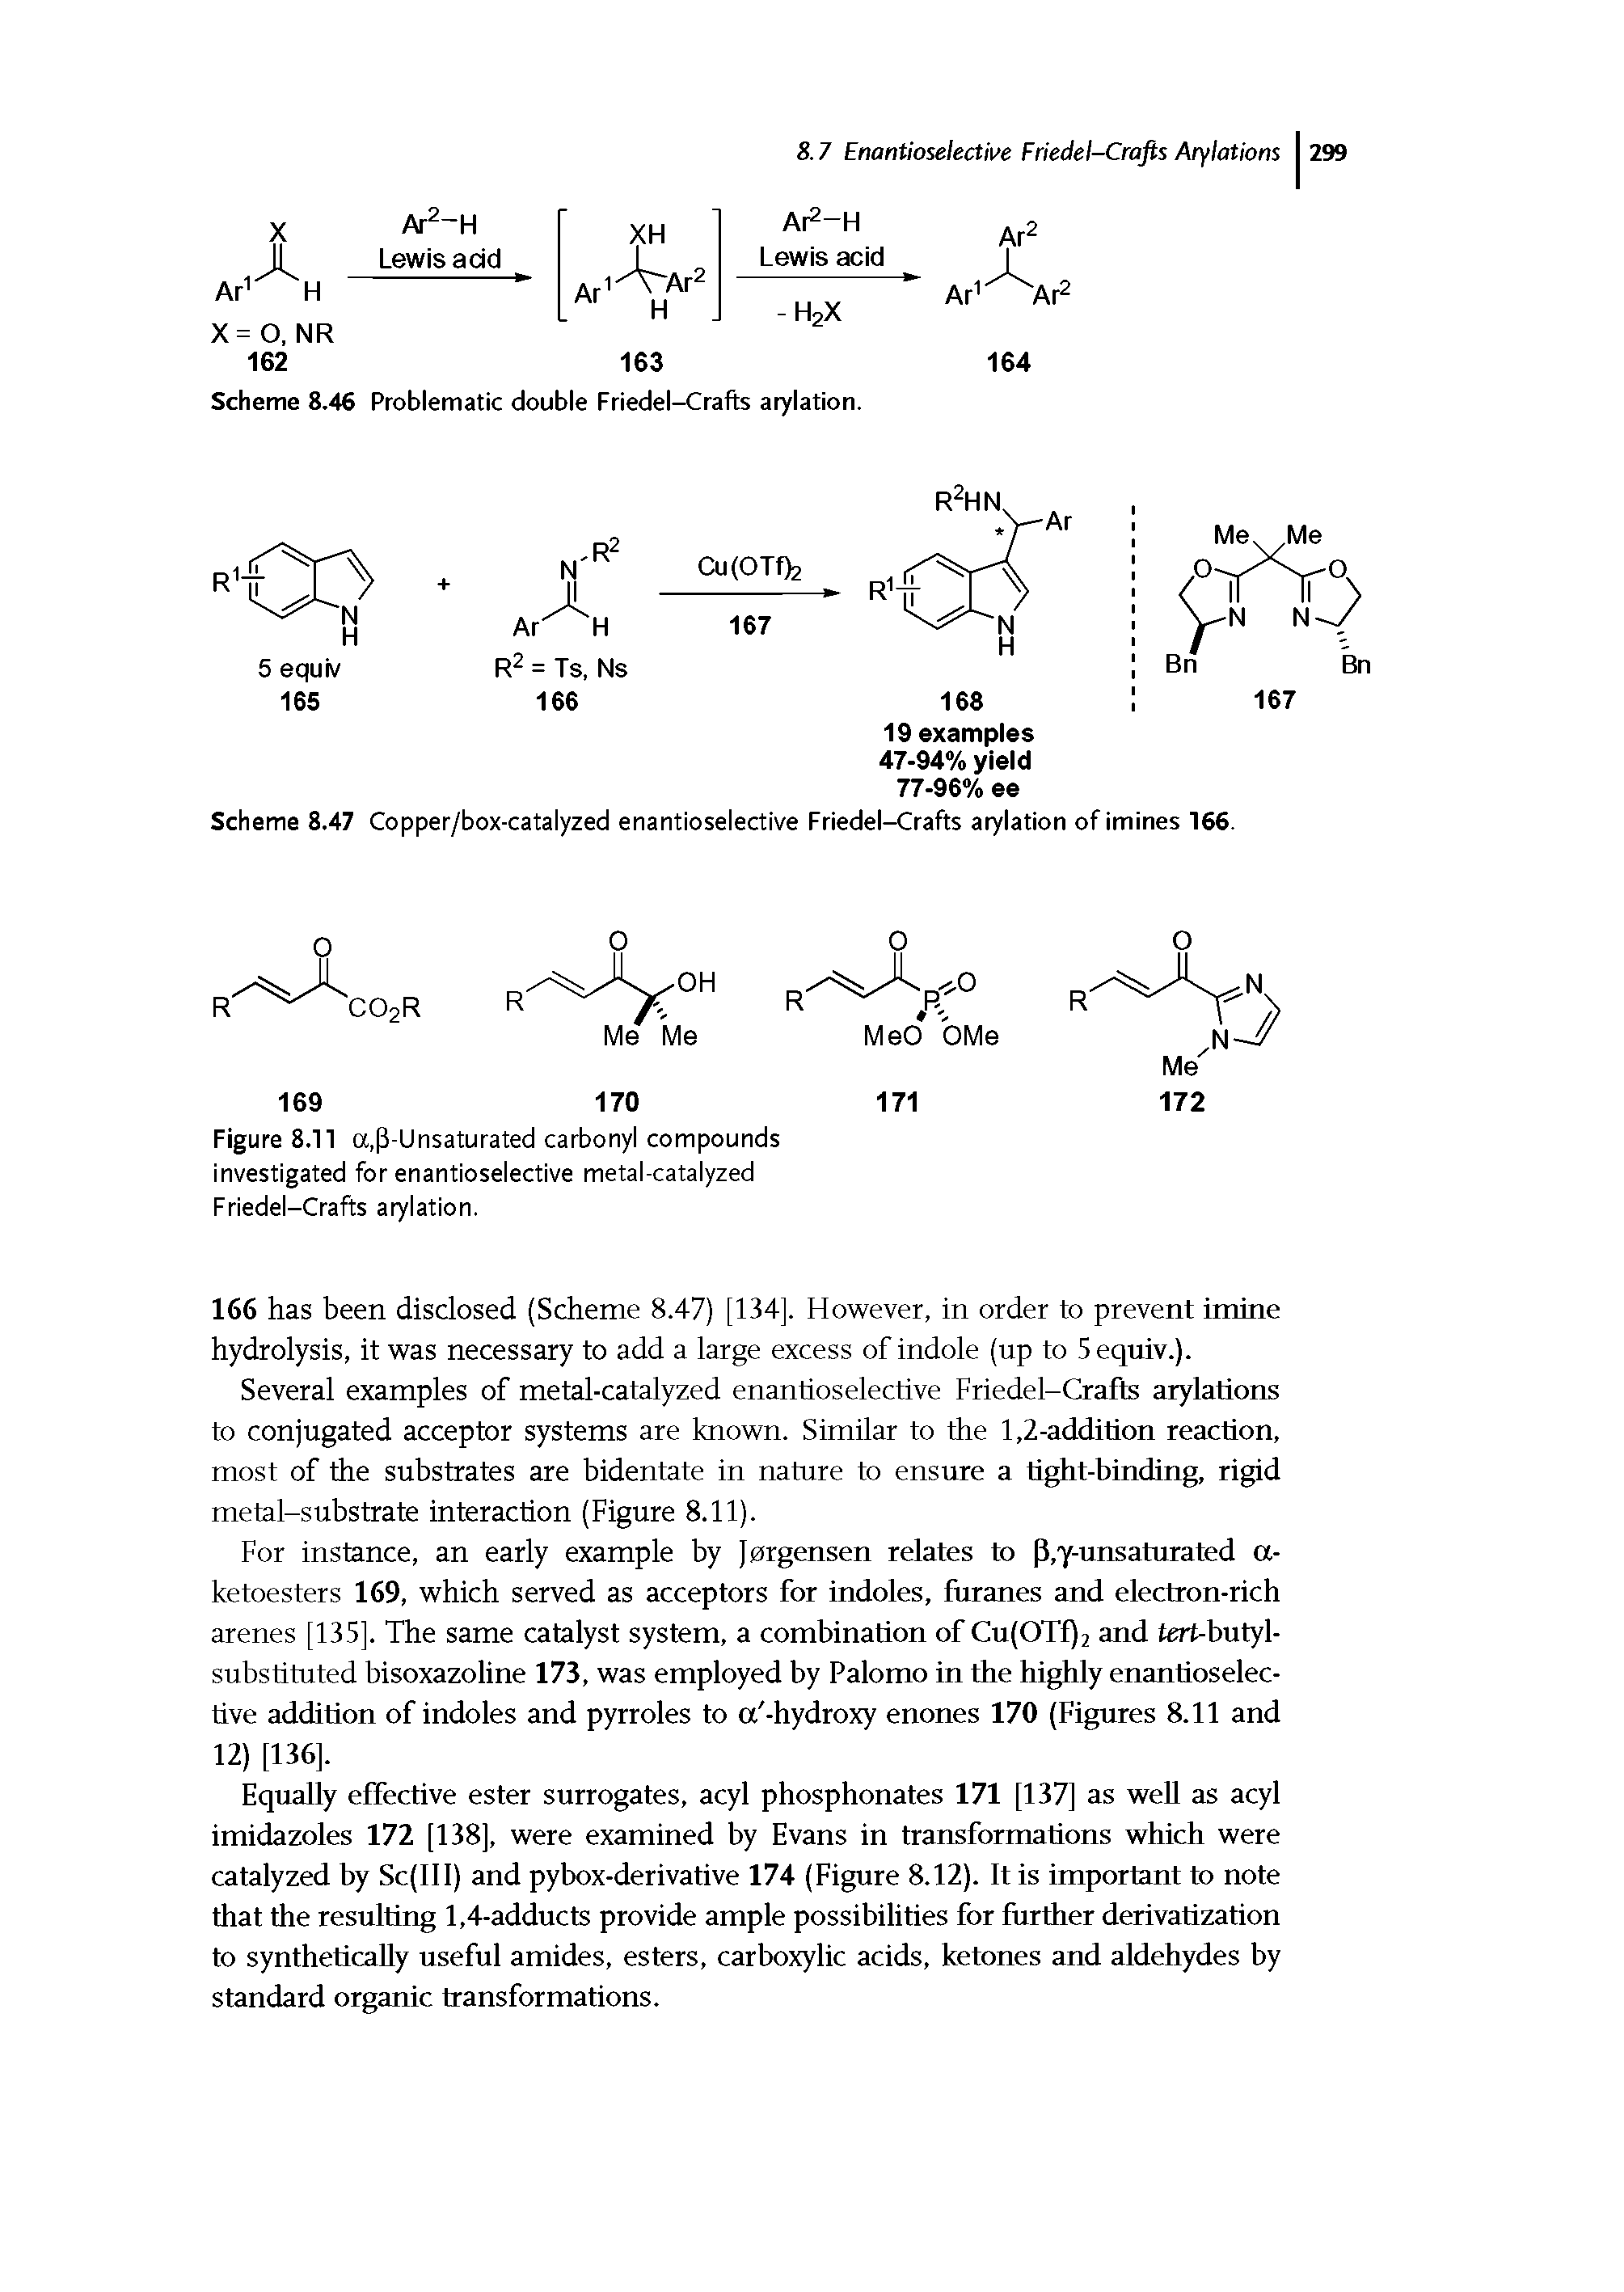 Scheme 8.47 Copper/box-catalyzed enantioselective Friedel-Crafts atylation of imines 166.